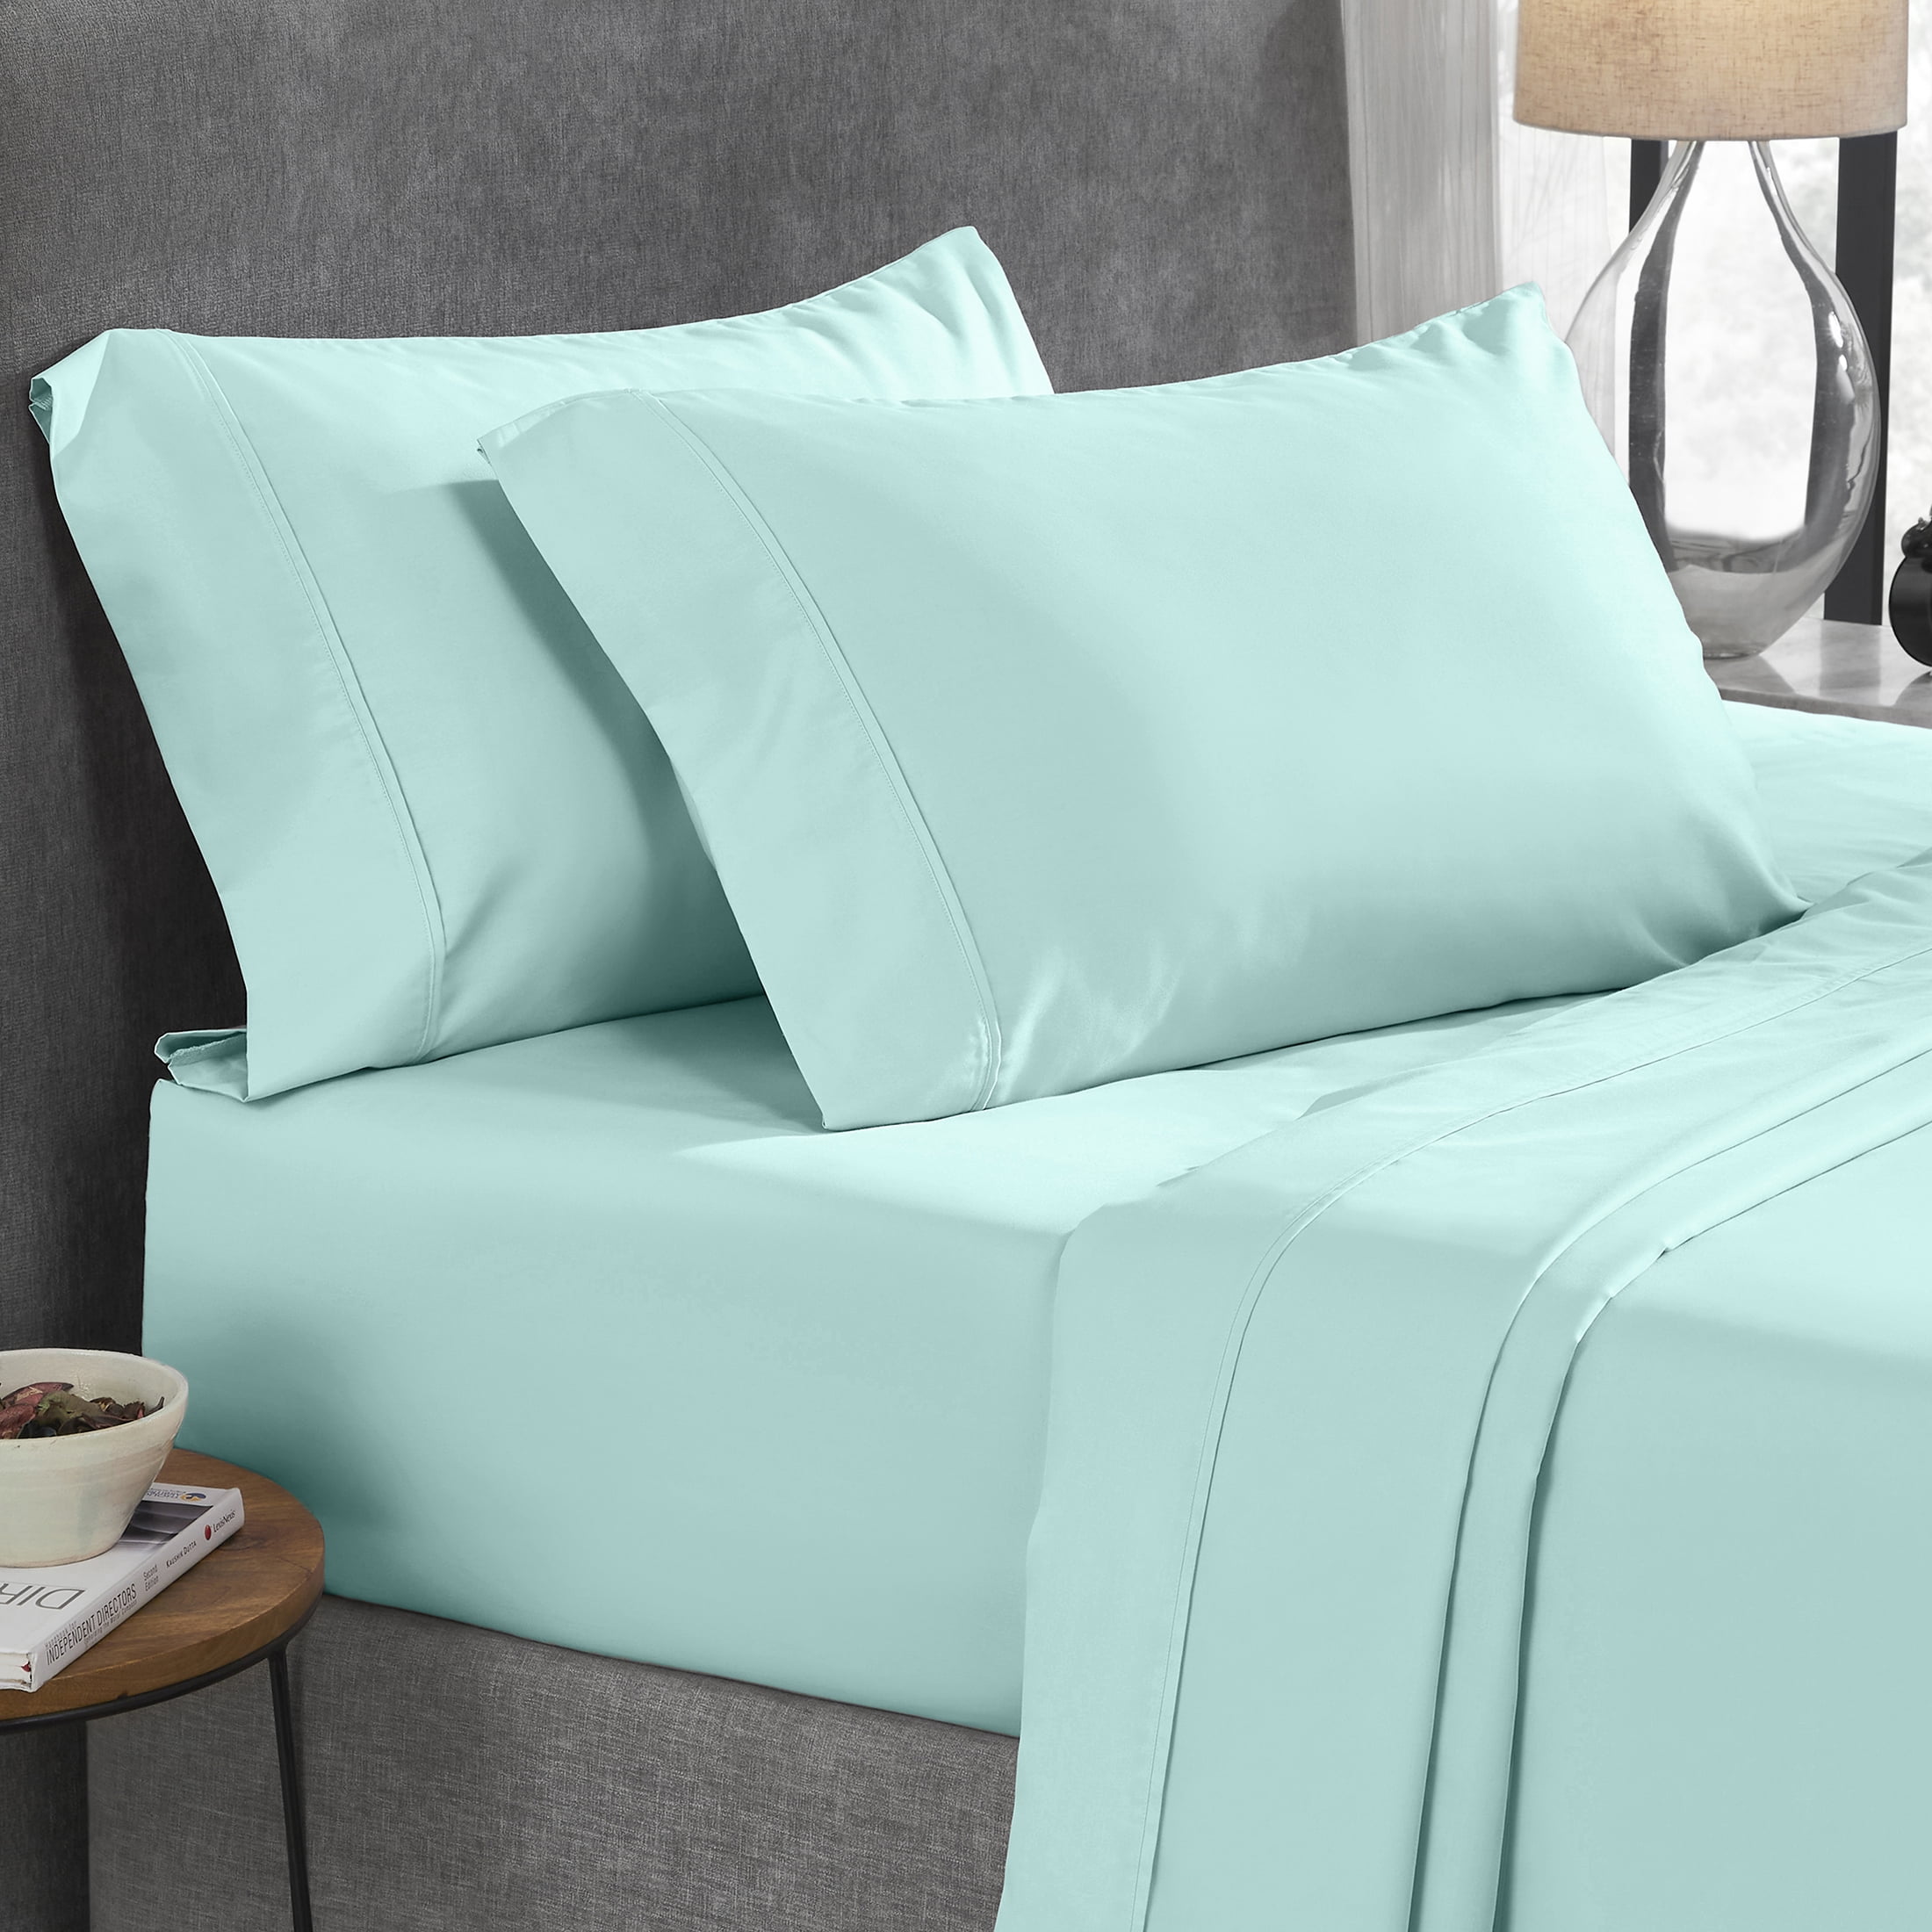 Details about   Tremendous Bedding Item Deep Pocket White Solid Egyptian Cotton All US Size 